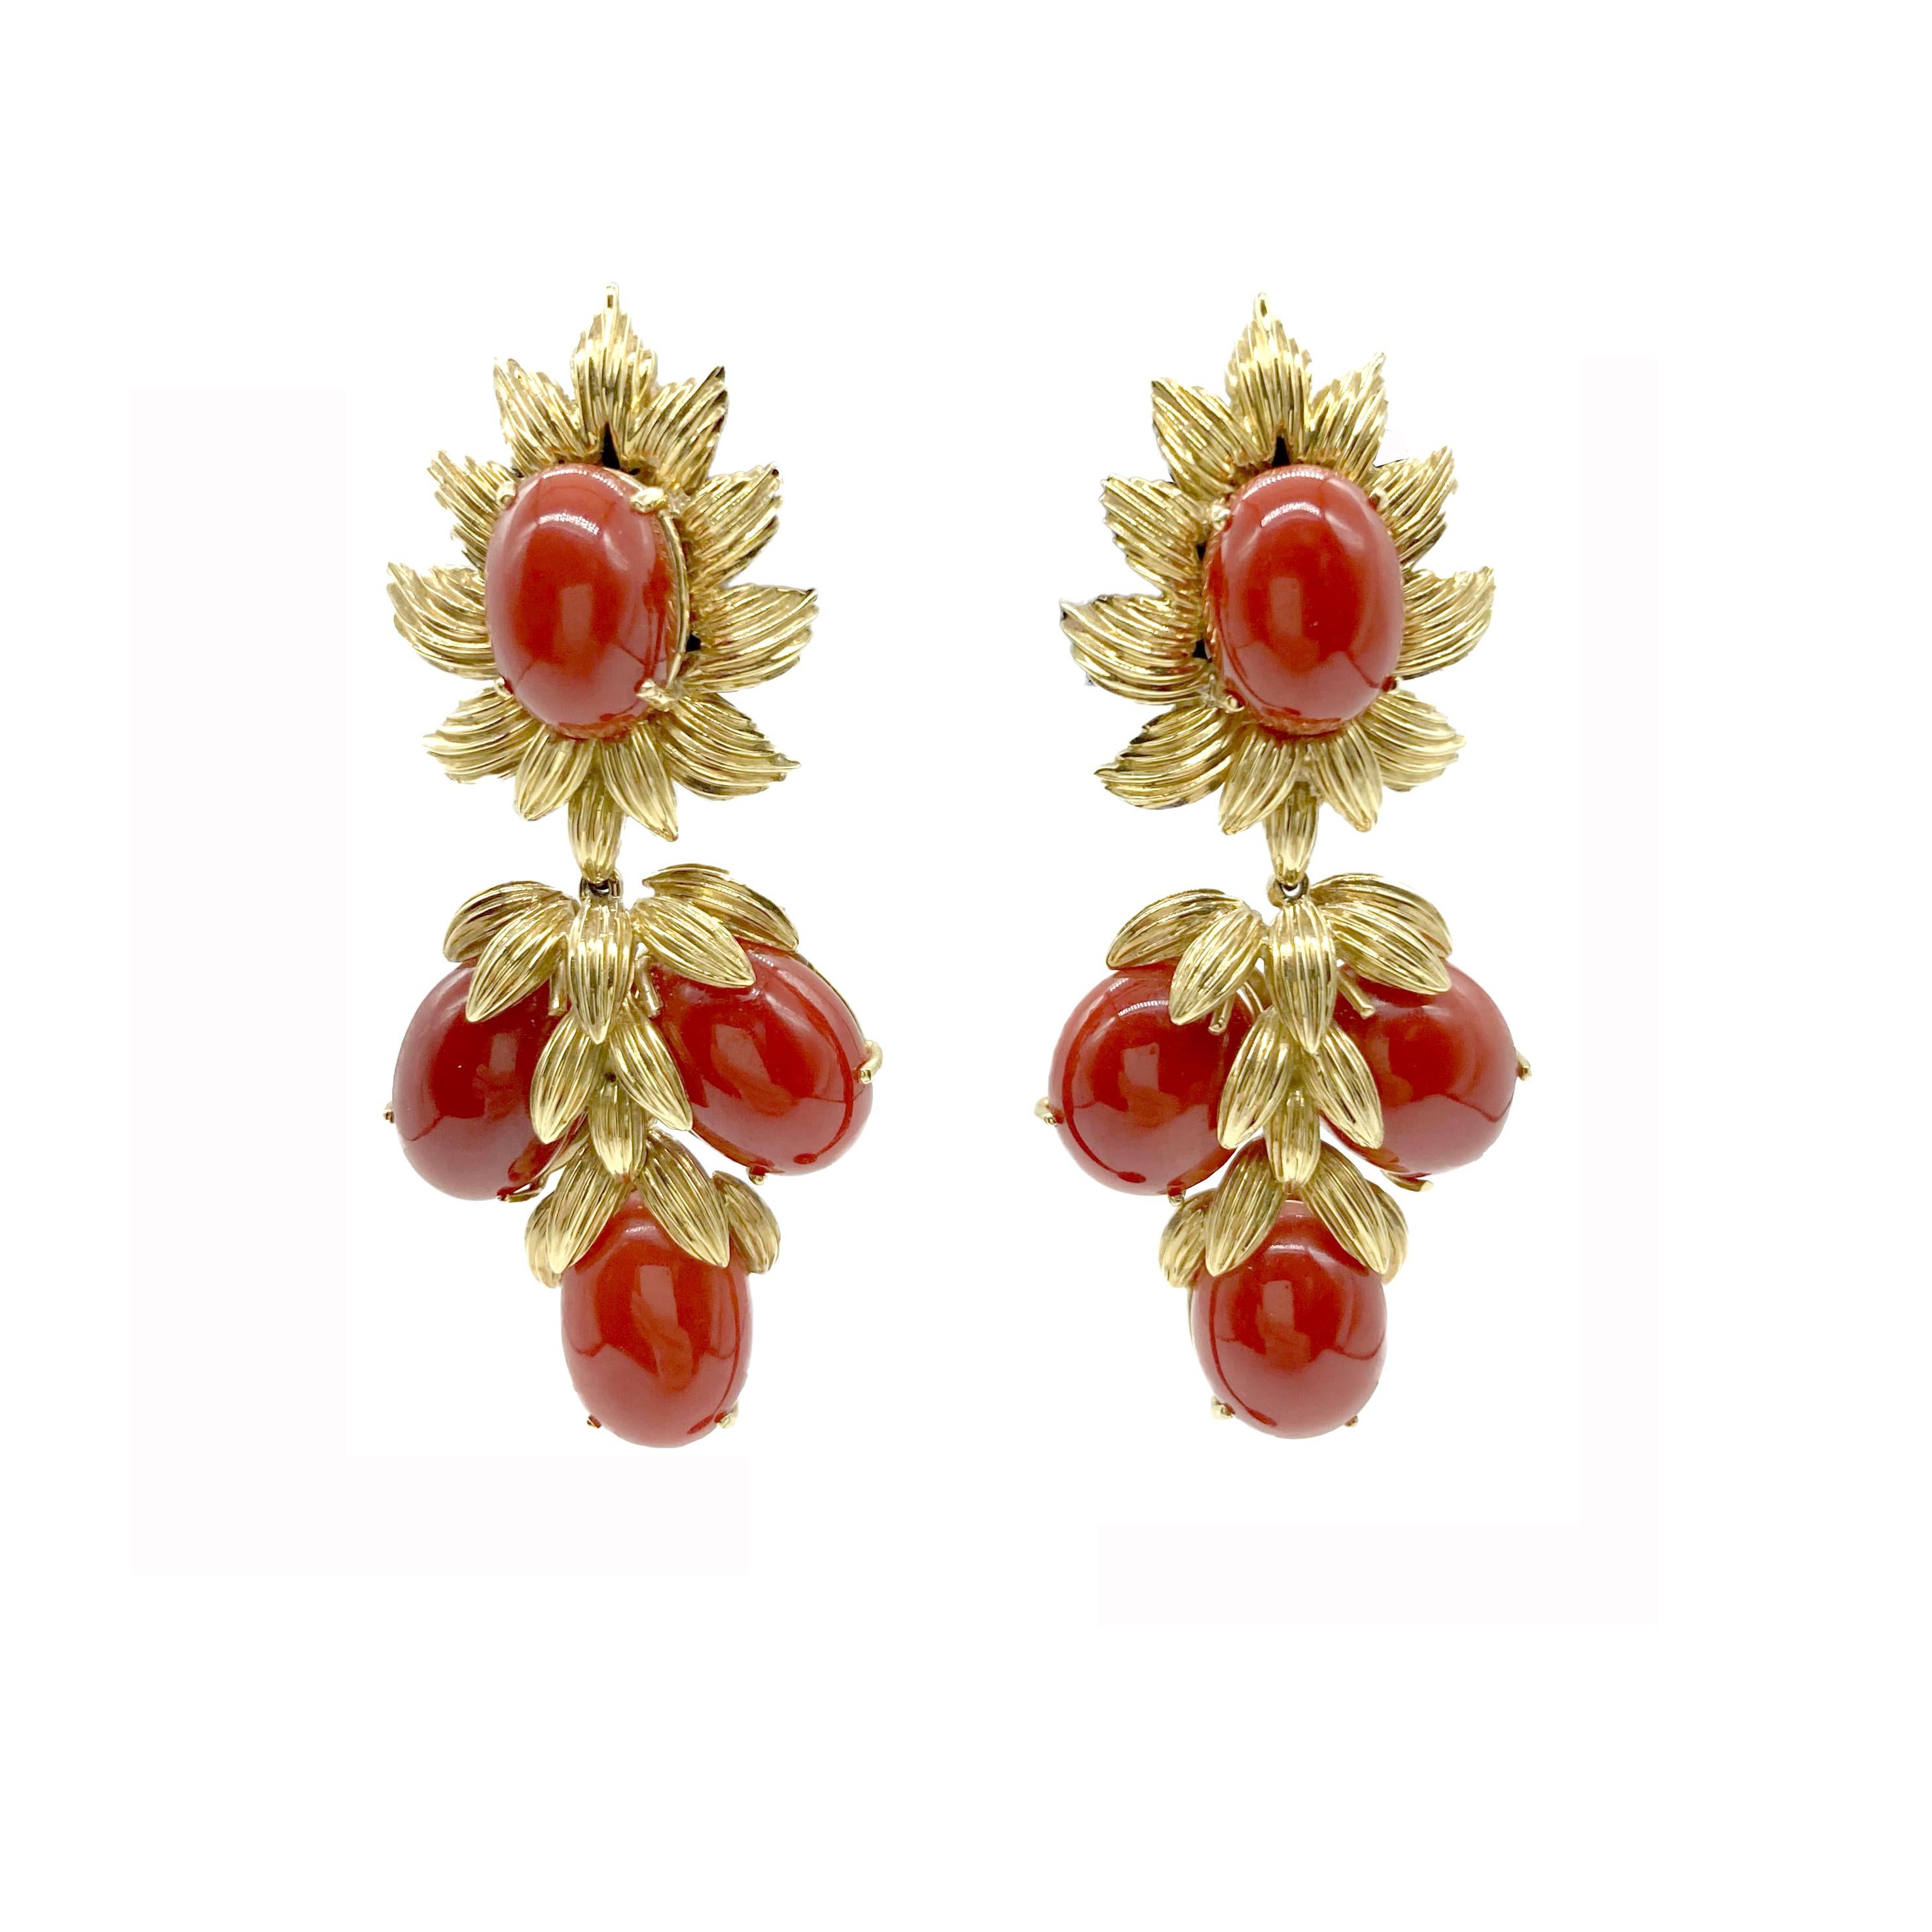 A stylish pair of vintage red coral and yellow gold ear pendants, circa 1960s. 